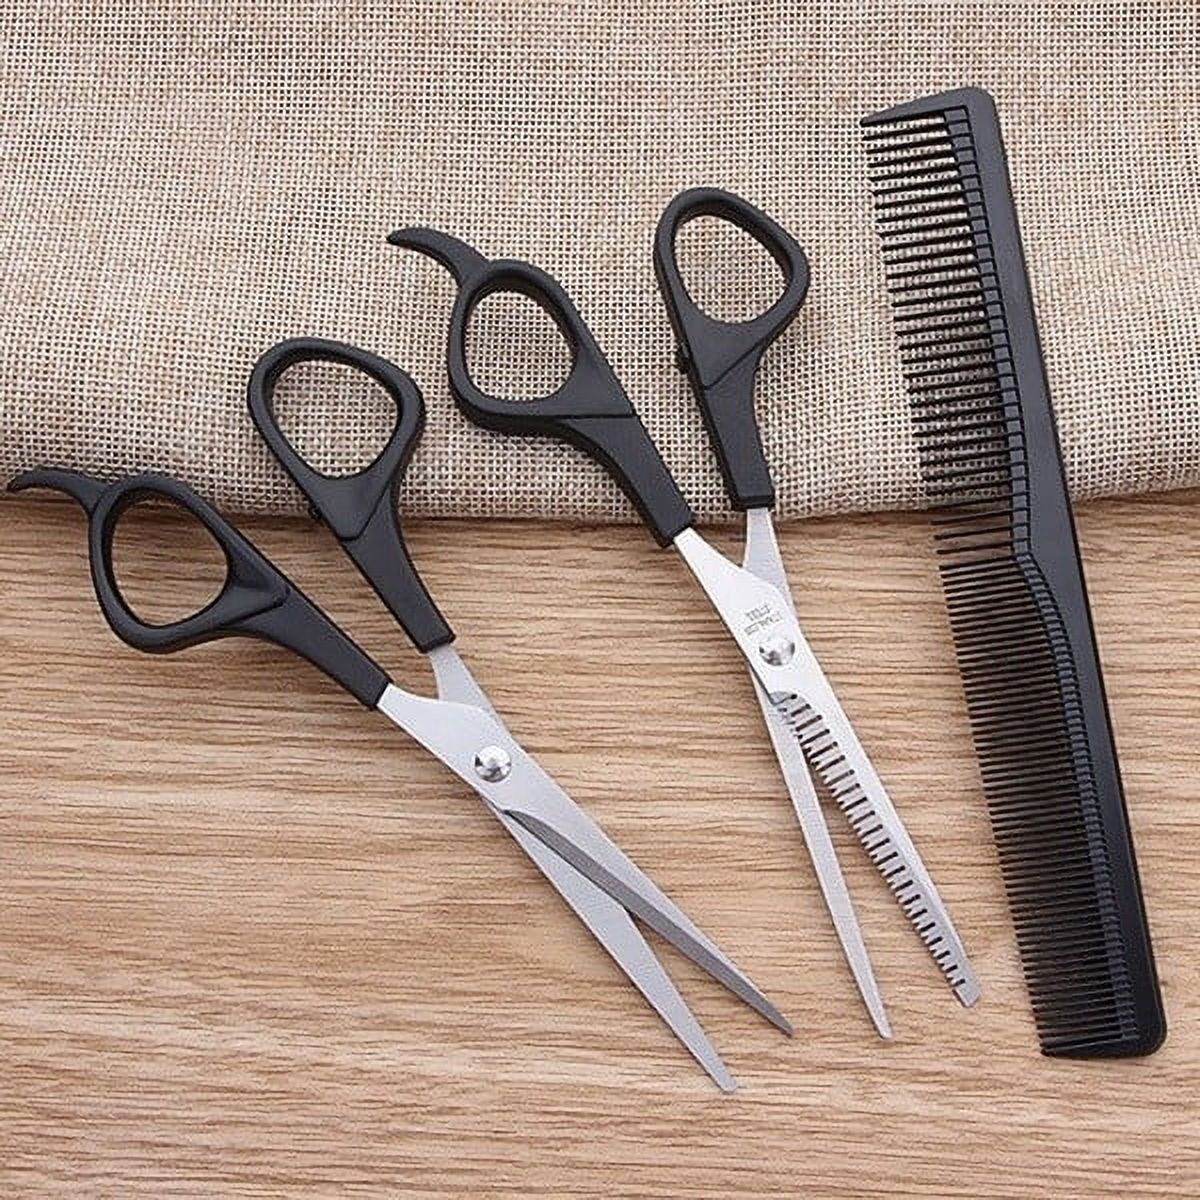 Willstar 3/9pcs Hair Cutting Scissors Set Professional Stainless Steel Barber Thinning Scissors for Barber Salon and Home - image 13 of 16